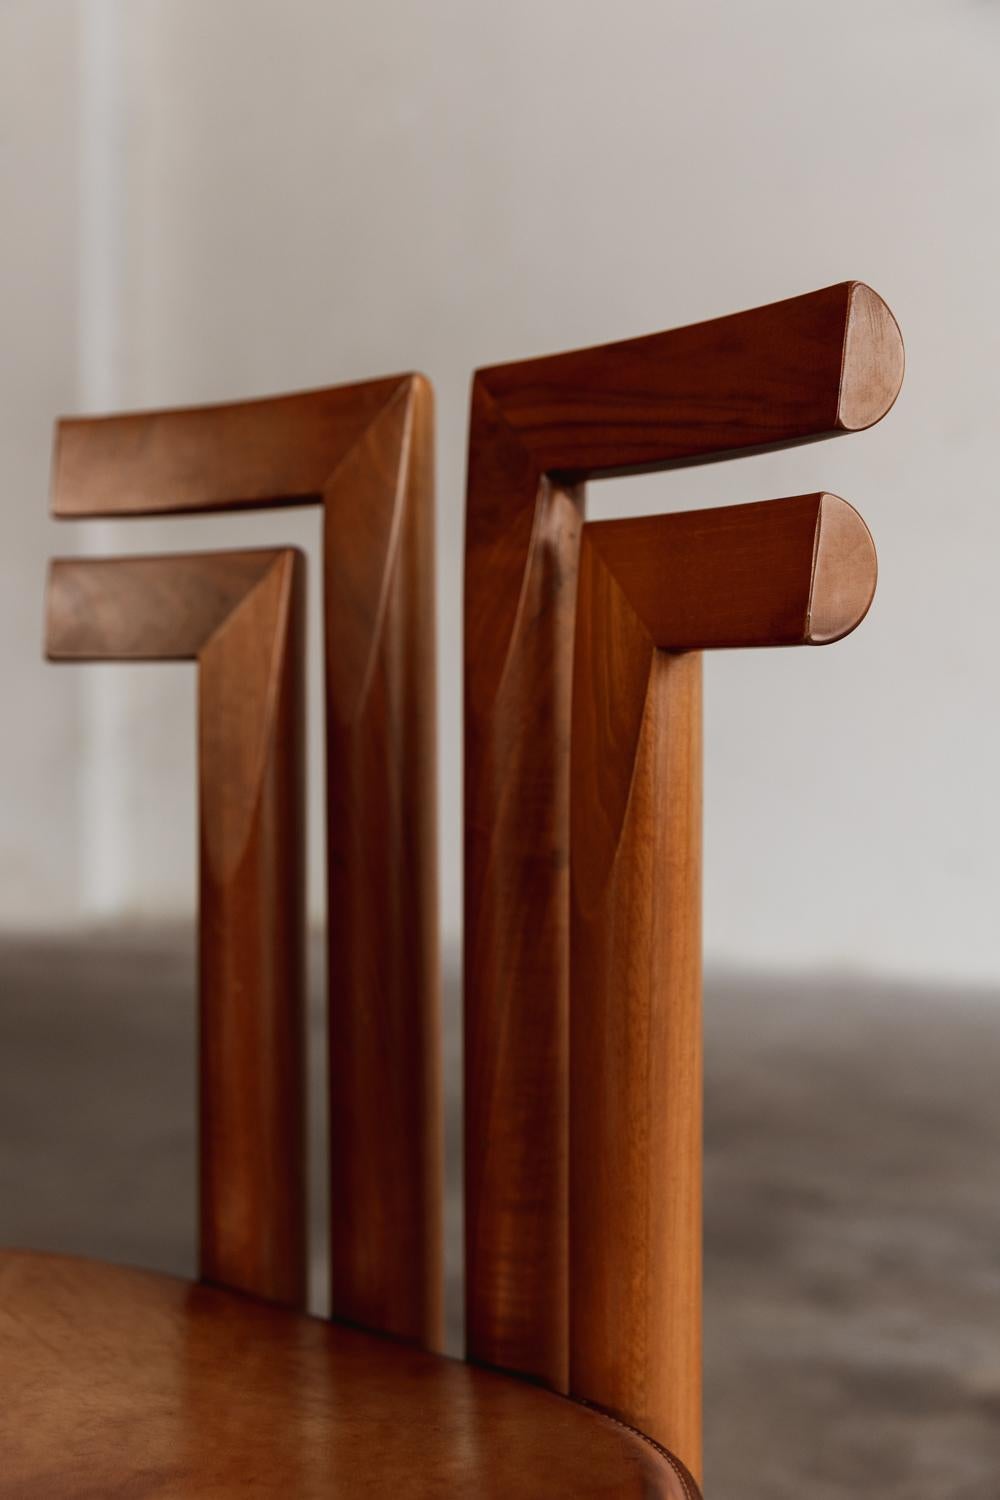 Late 20th Century Mario Marenco “Sapporo” Dining Chairs for Mobil Girgi, 1970 For Sale